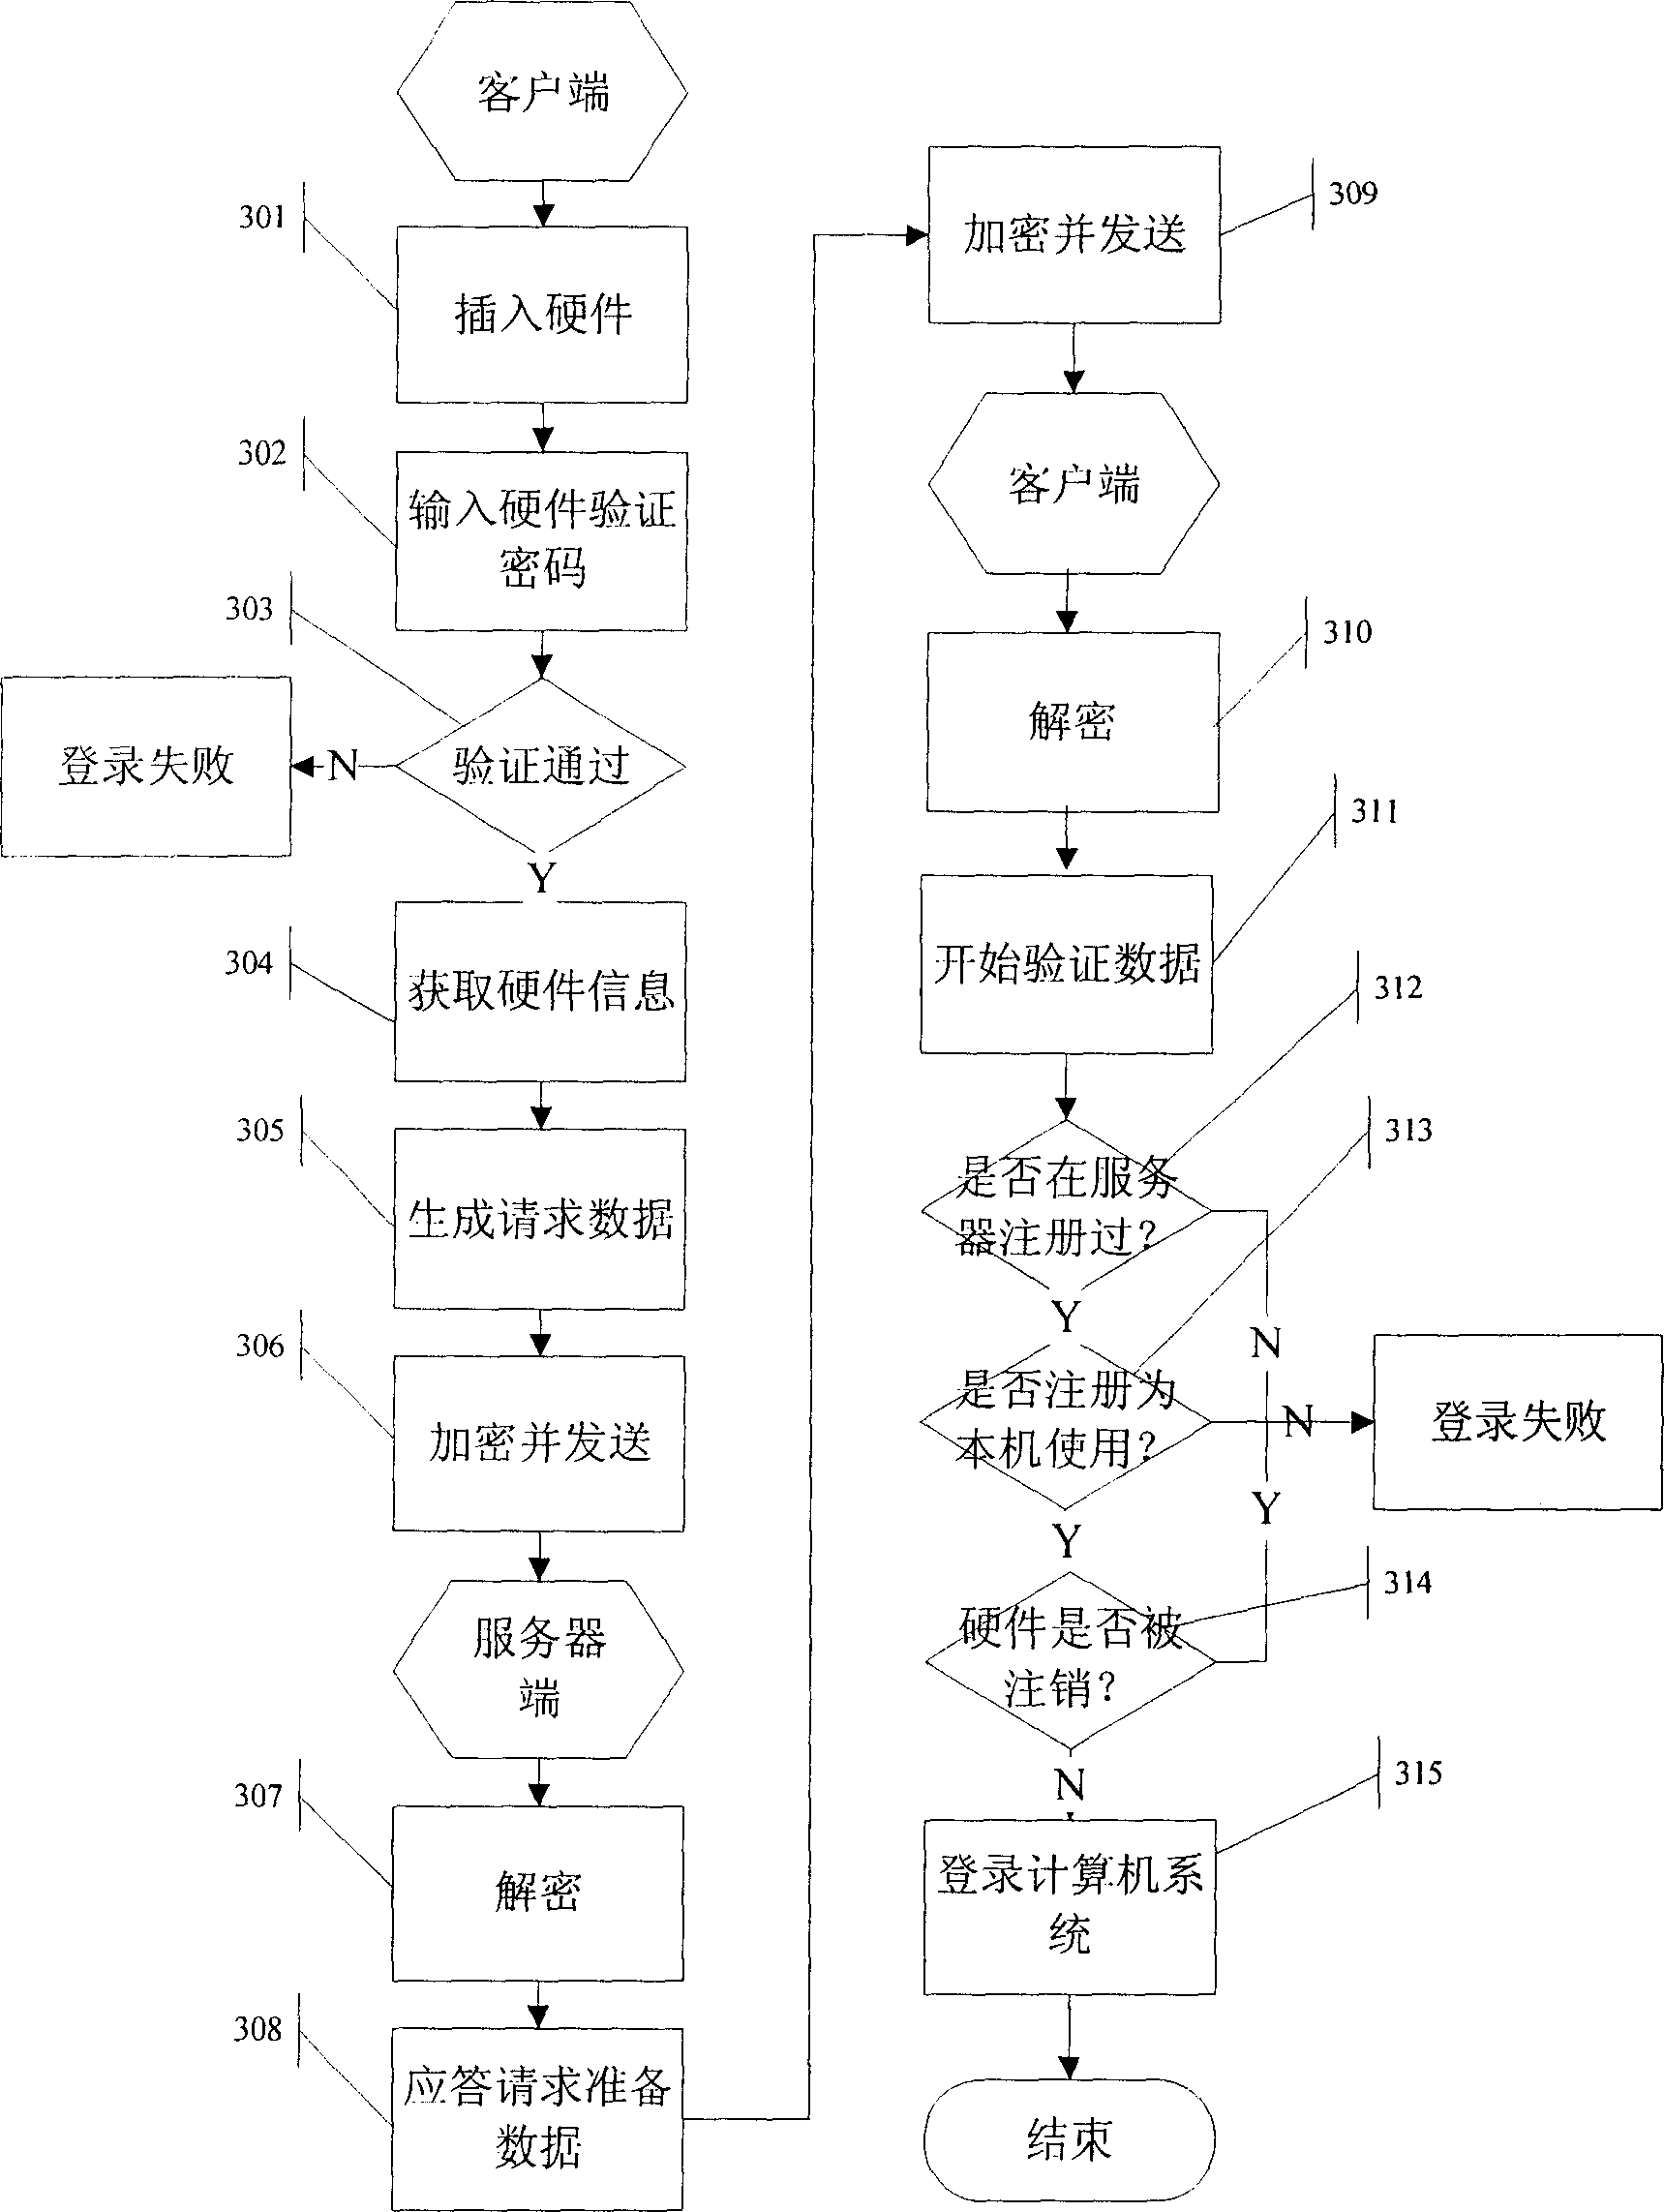 Device and method for controlling computer access